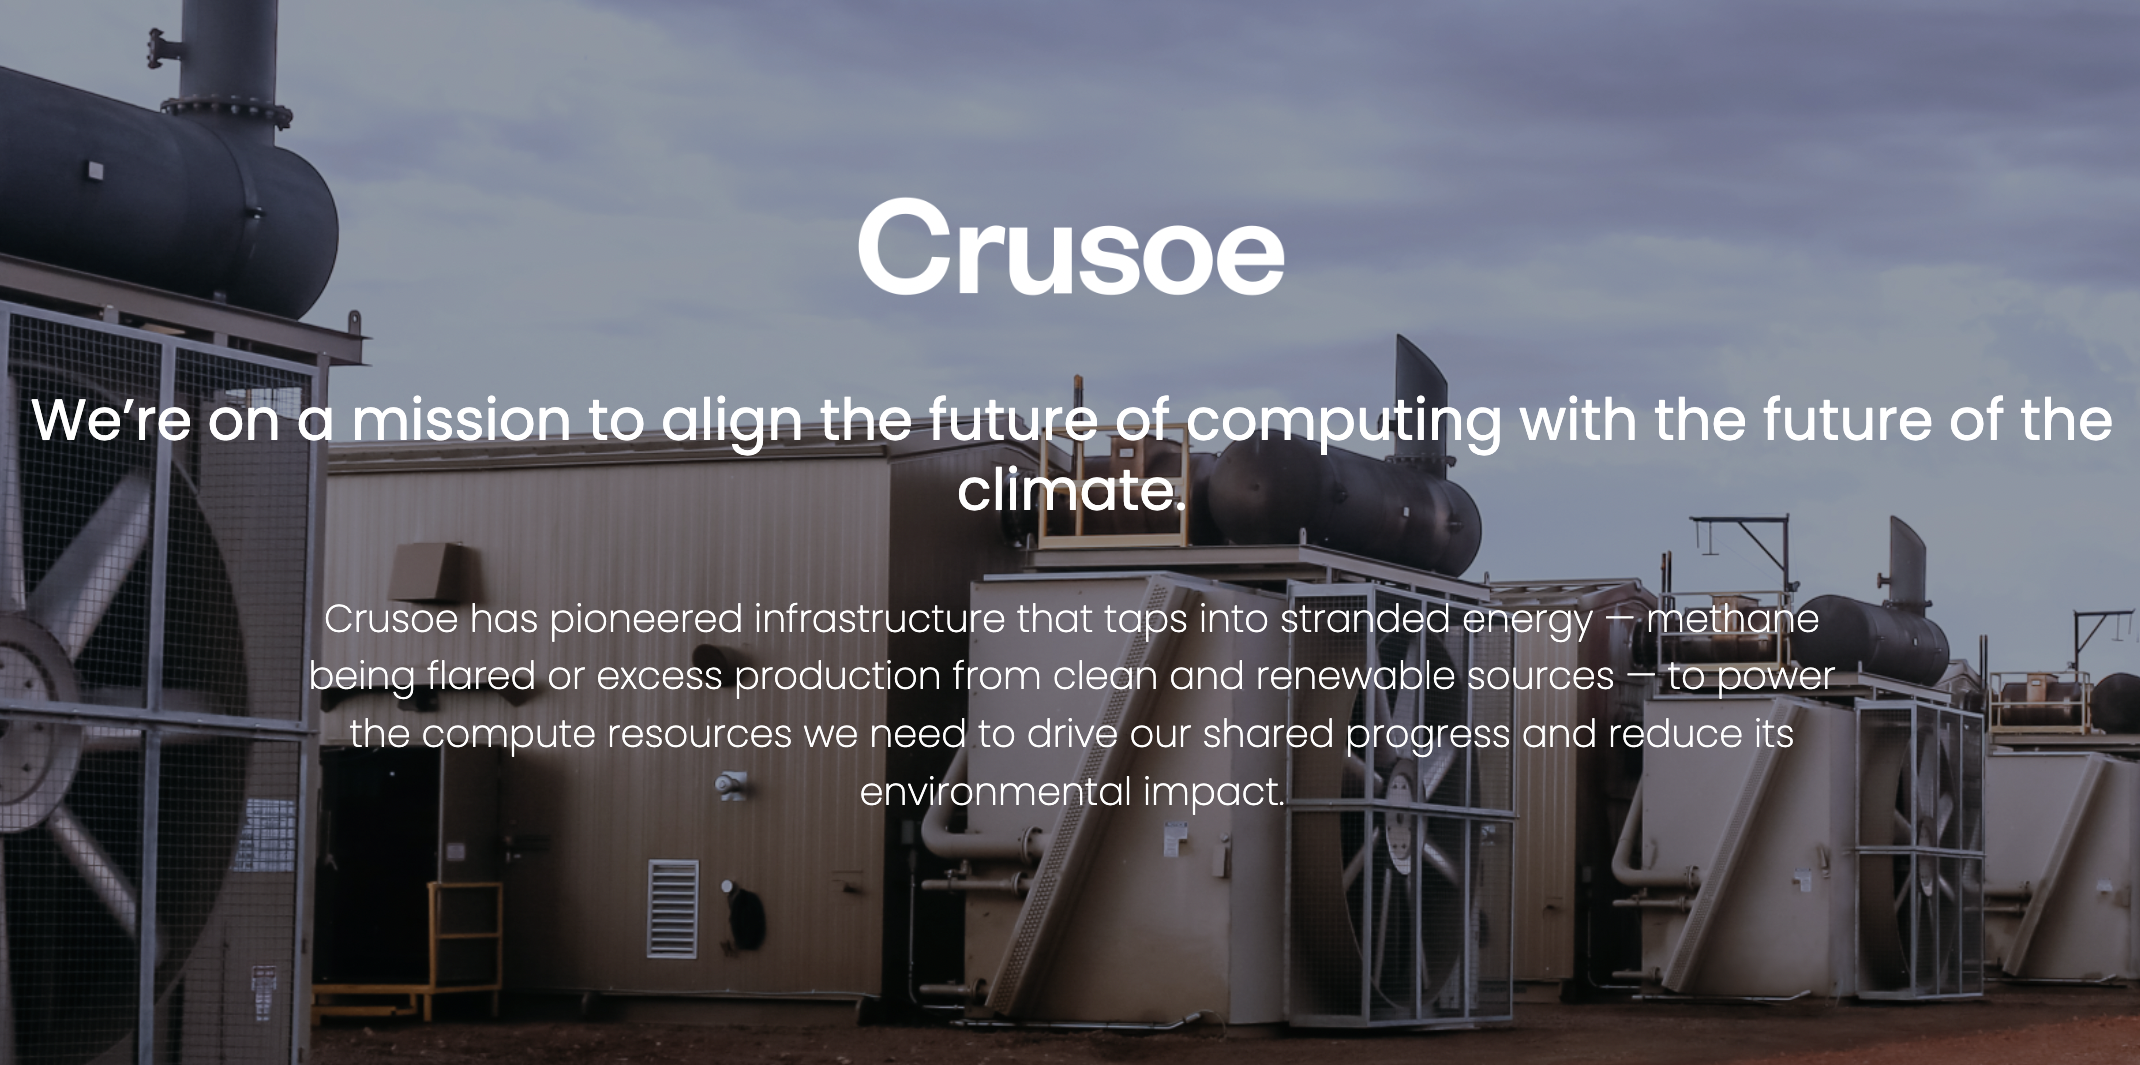 Website of Crusoe Energy Systems